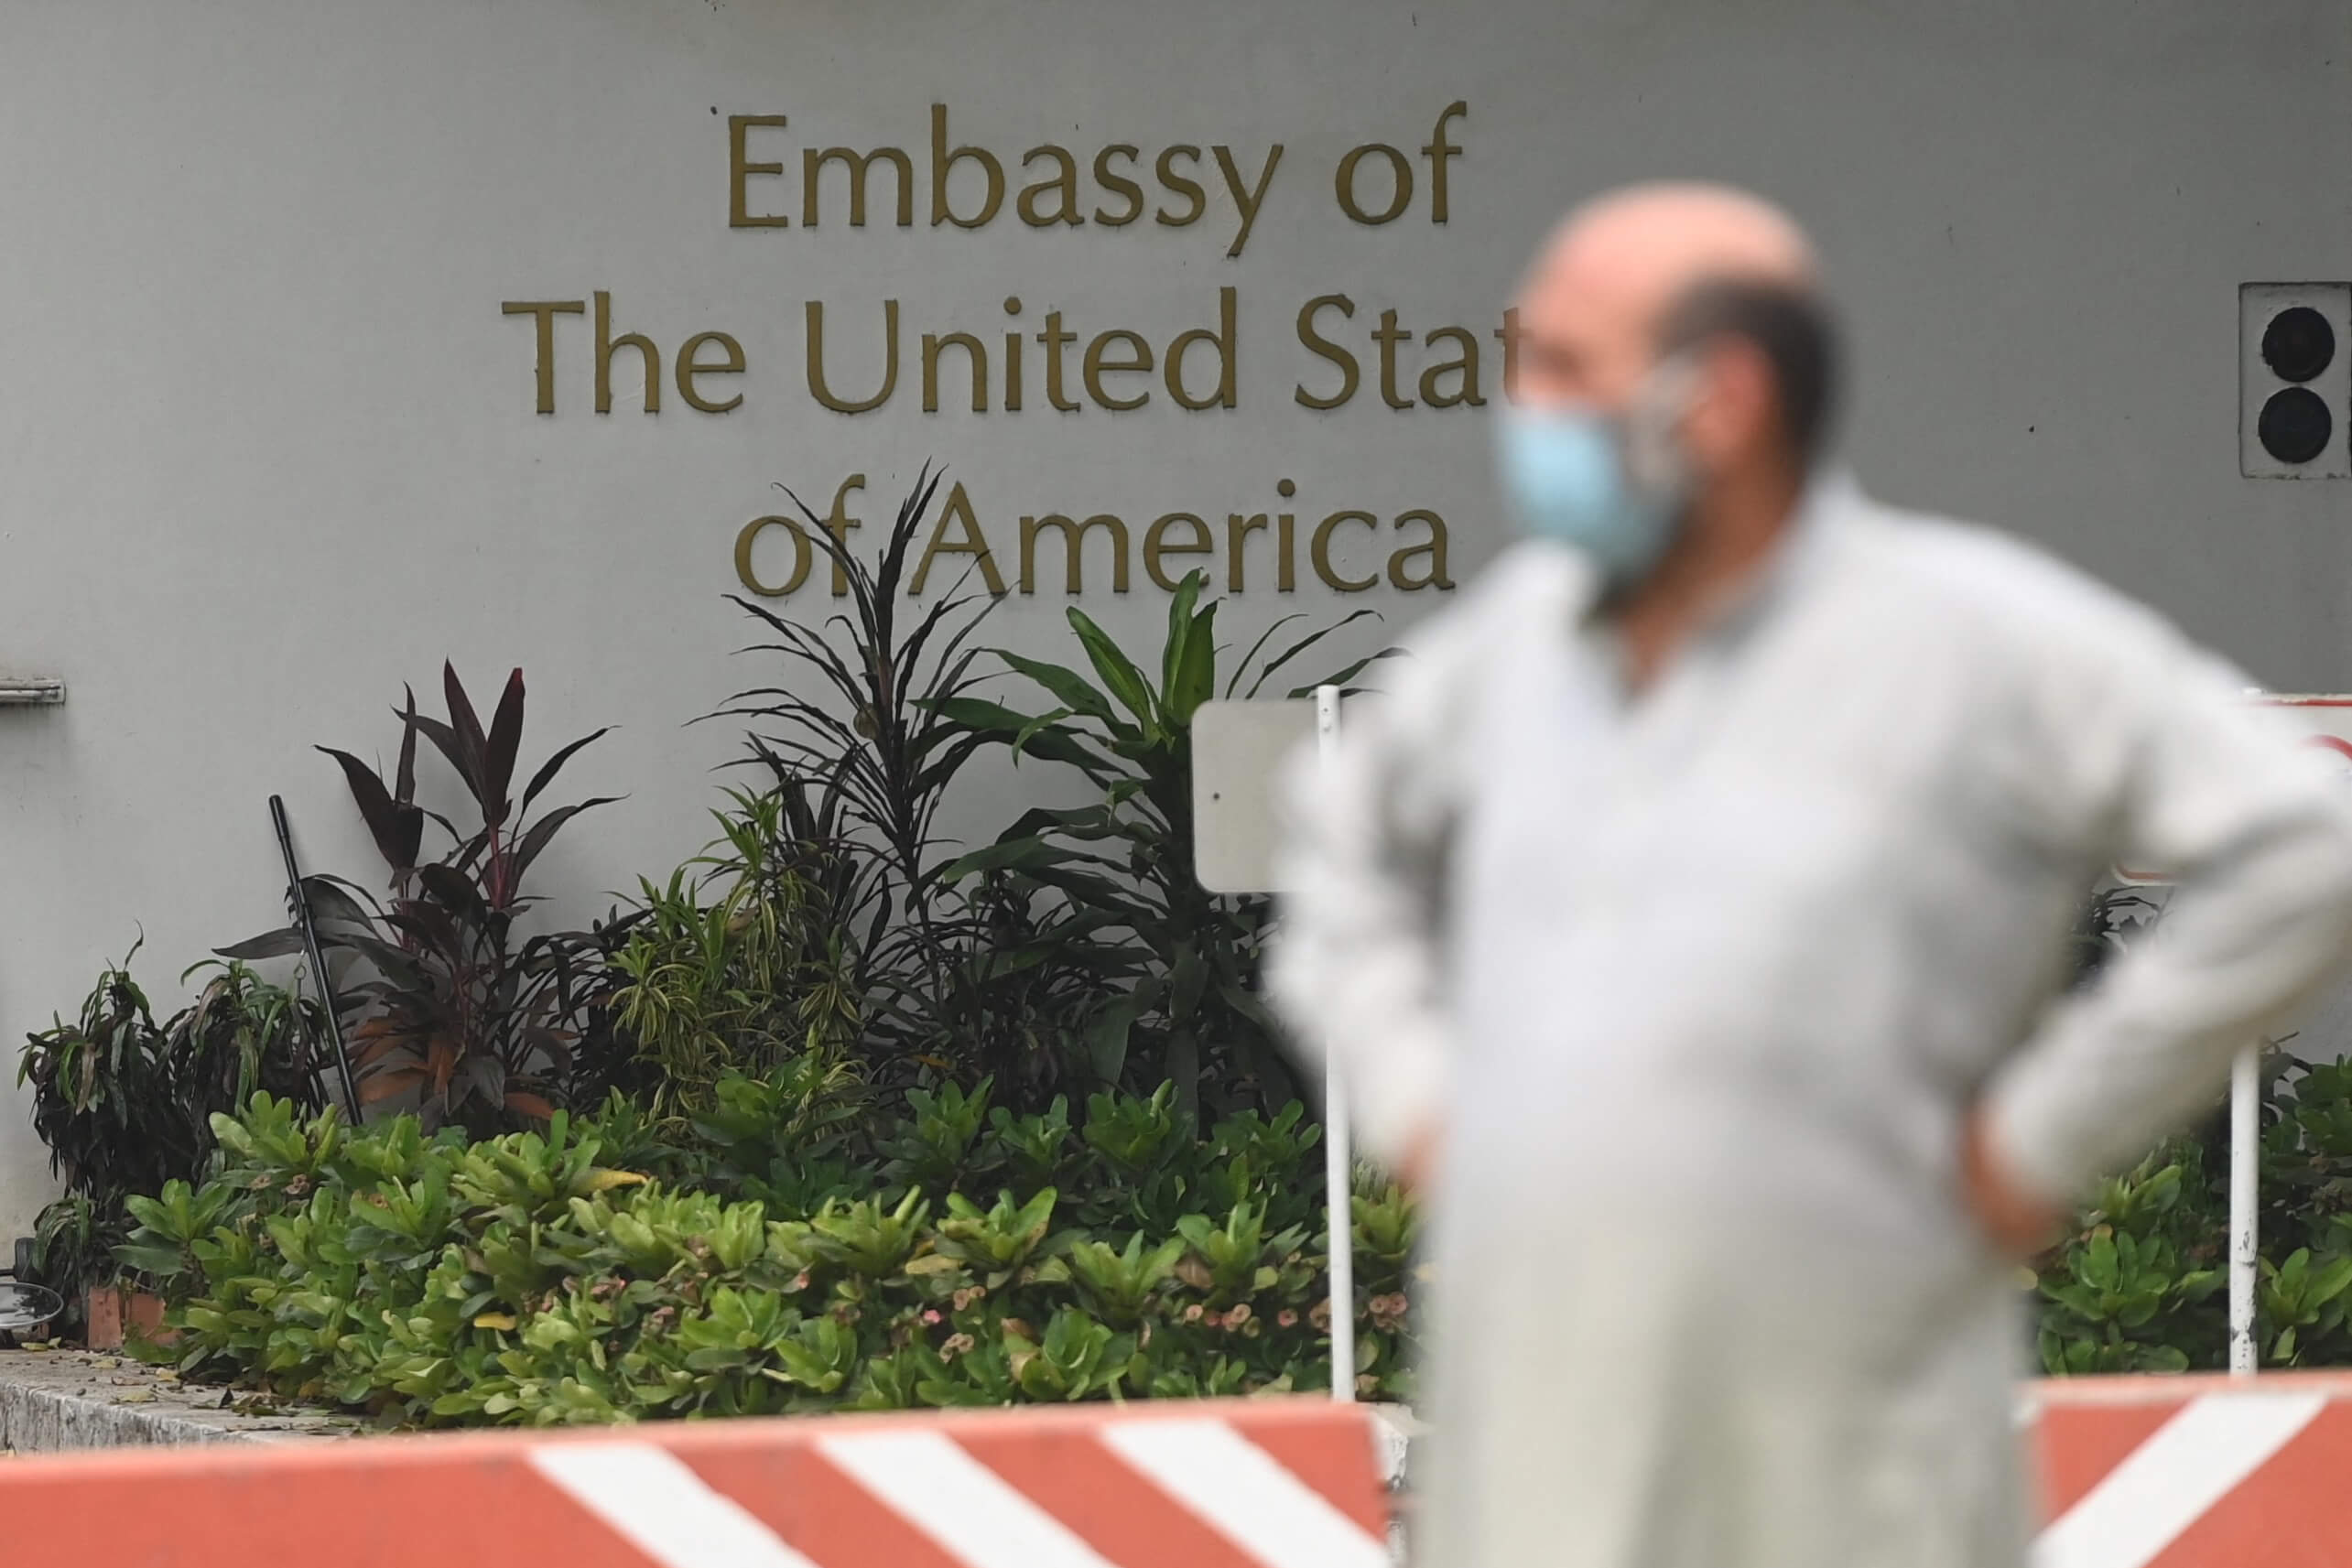 Apply for a US visa in India: The US Embassy in India has announced that it will stop in-person appointments for student visas starting in January due to record numbers in application.